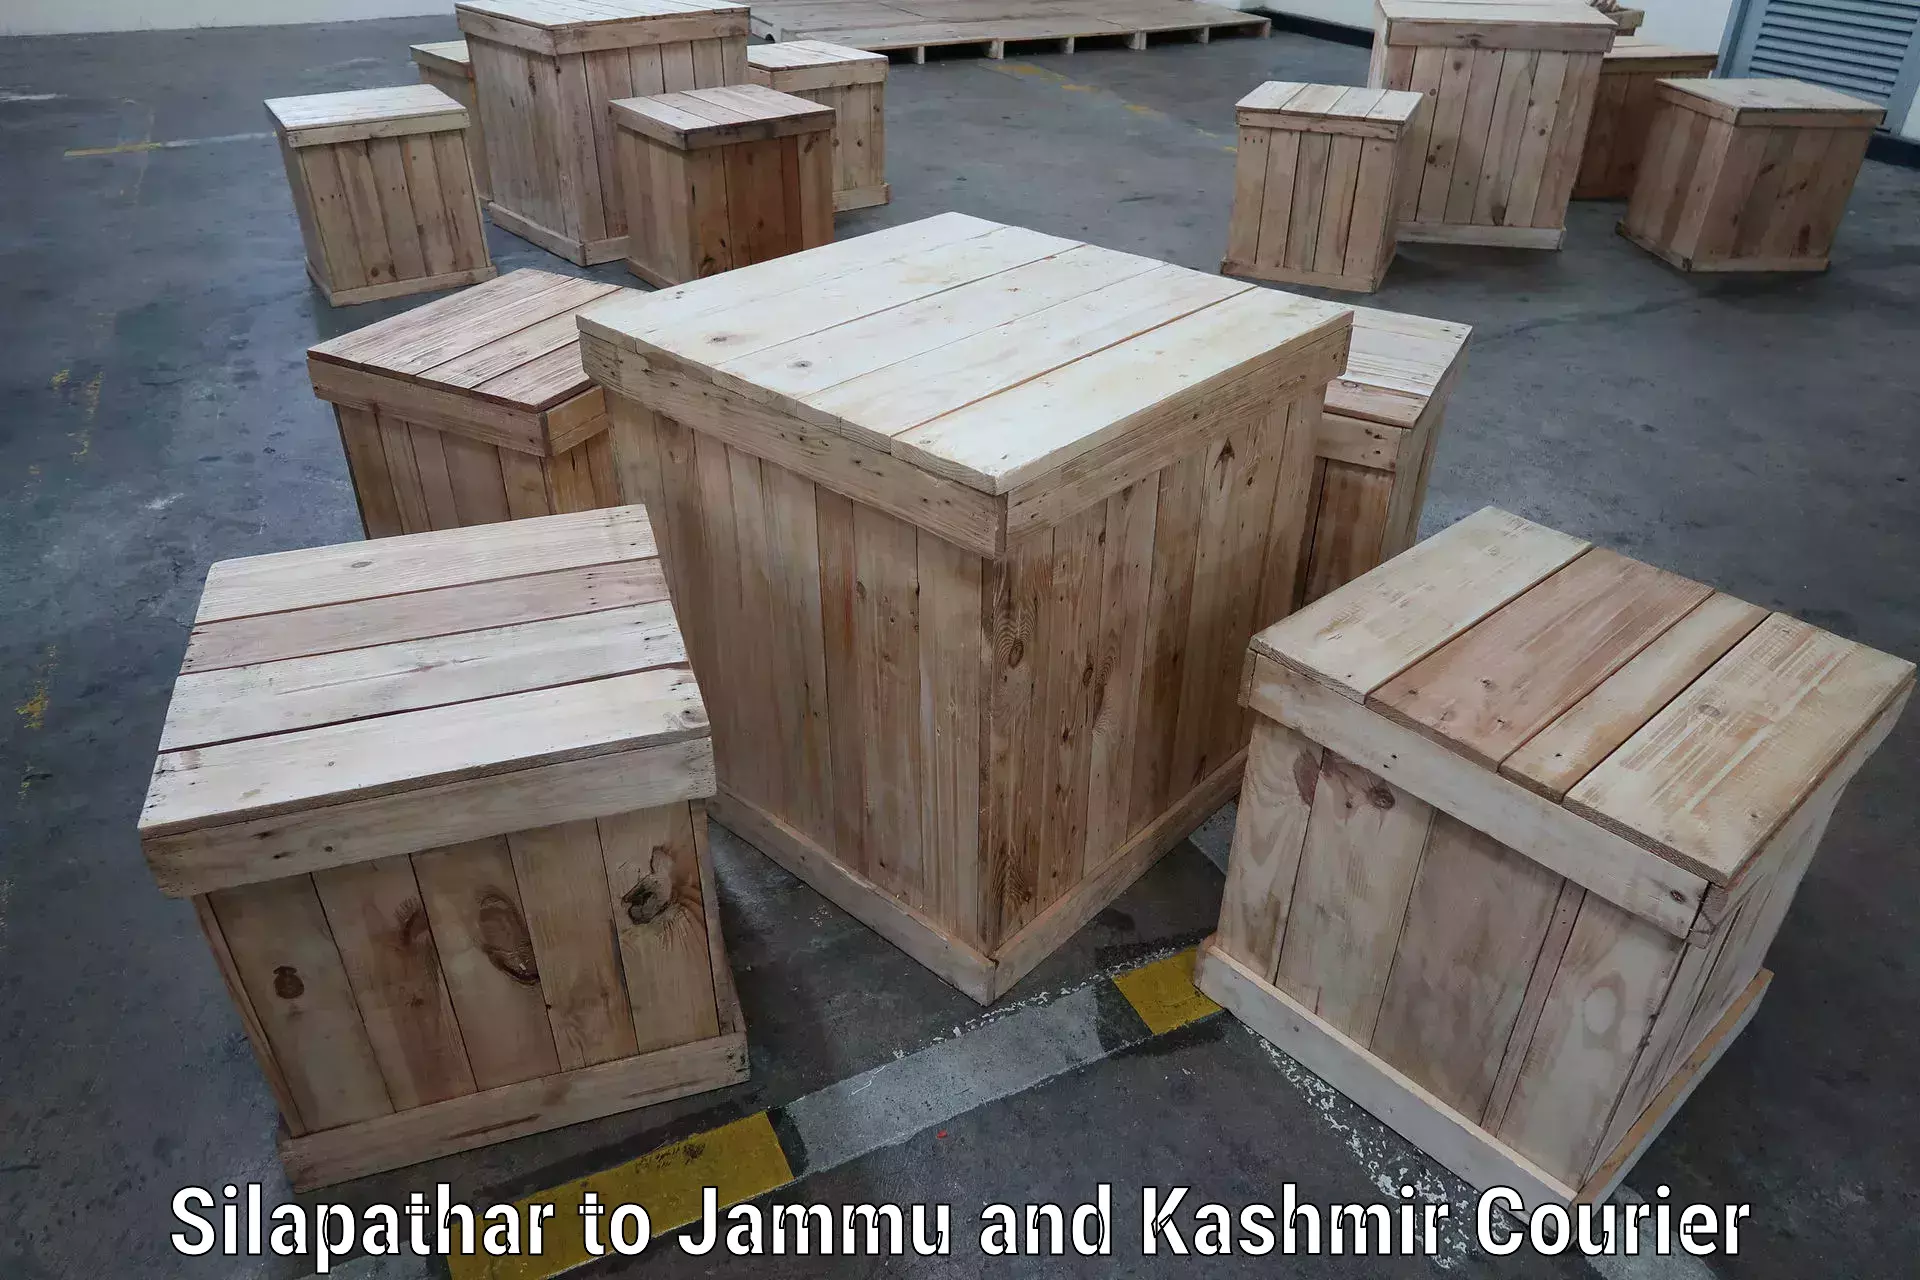 Subscription-based courier Silapathar to University of Jammu